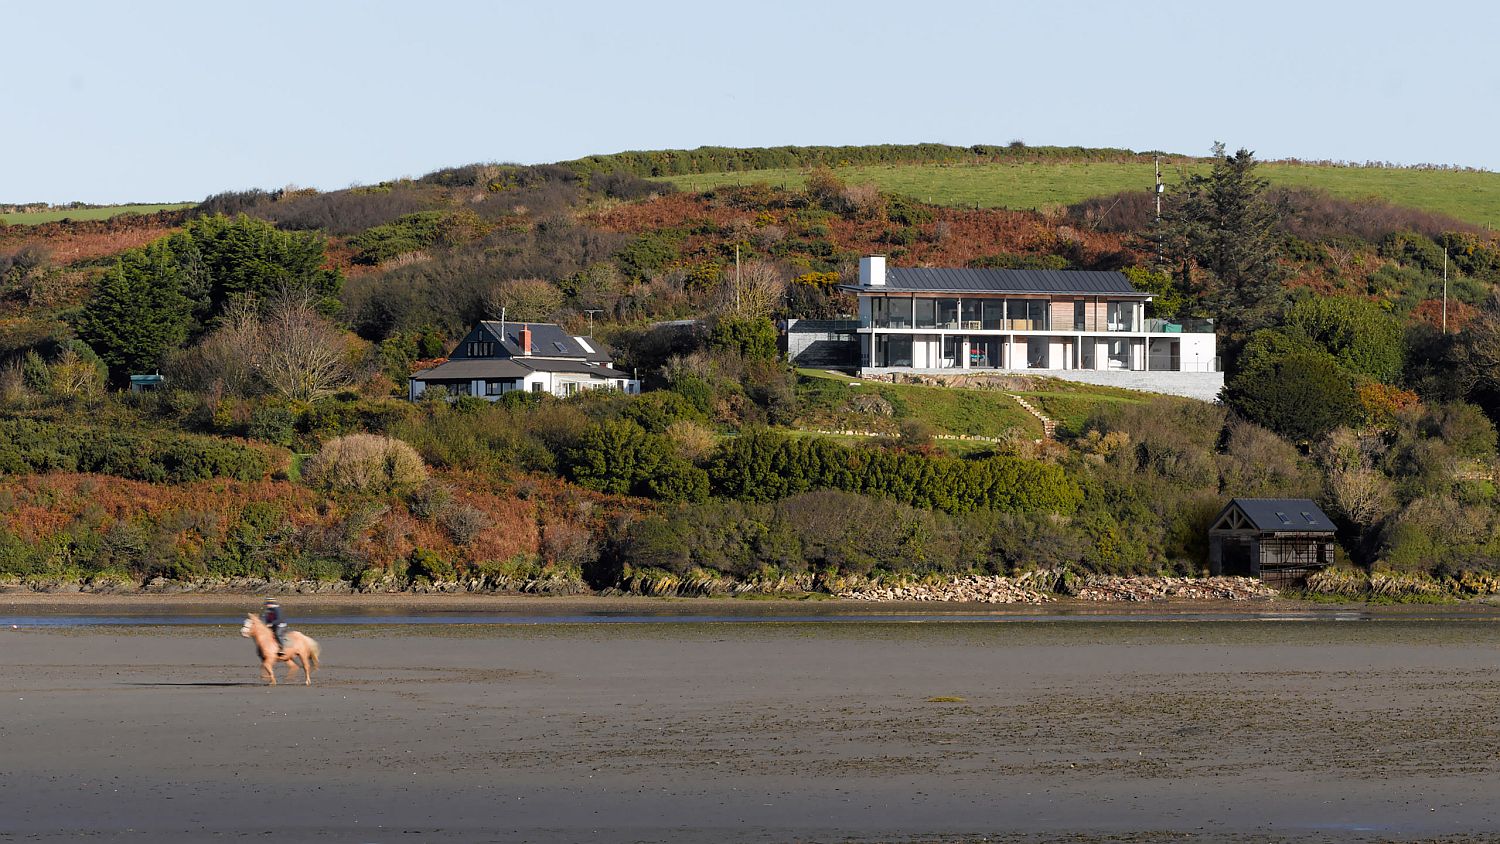 Awesome natural beauty along with a wide estuary and sea await at this home in Wales